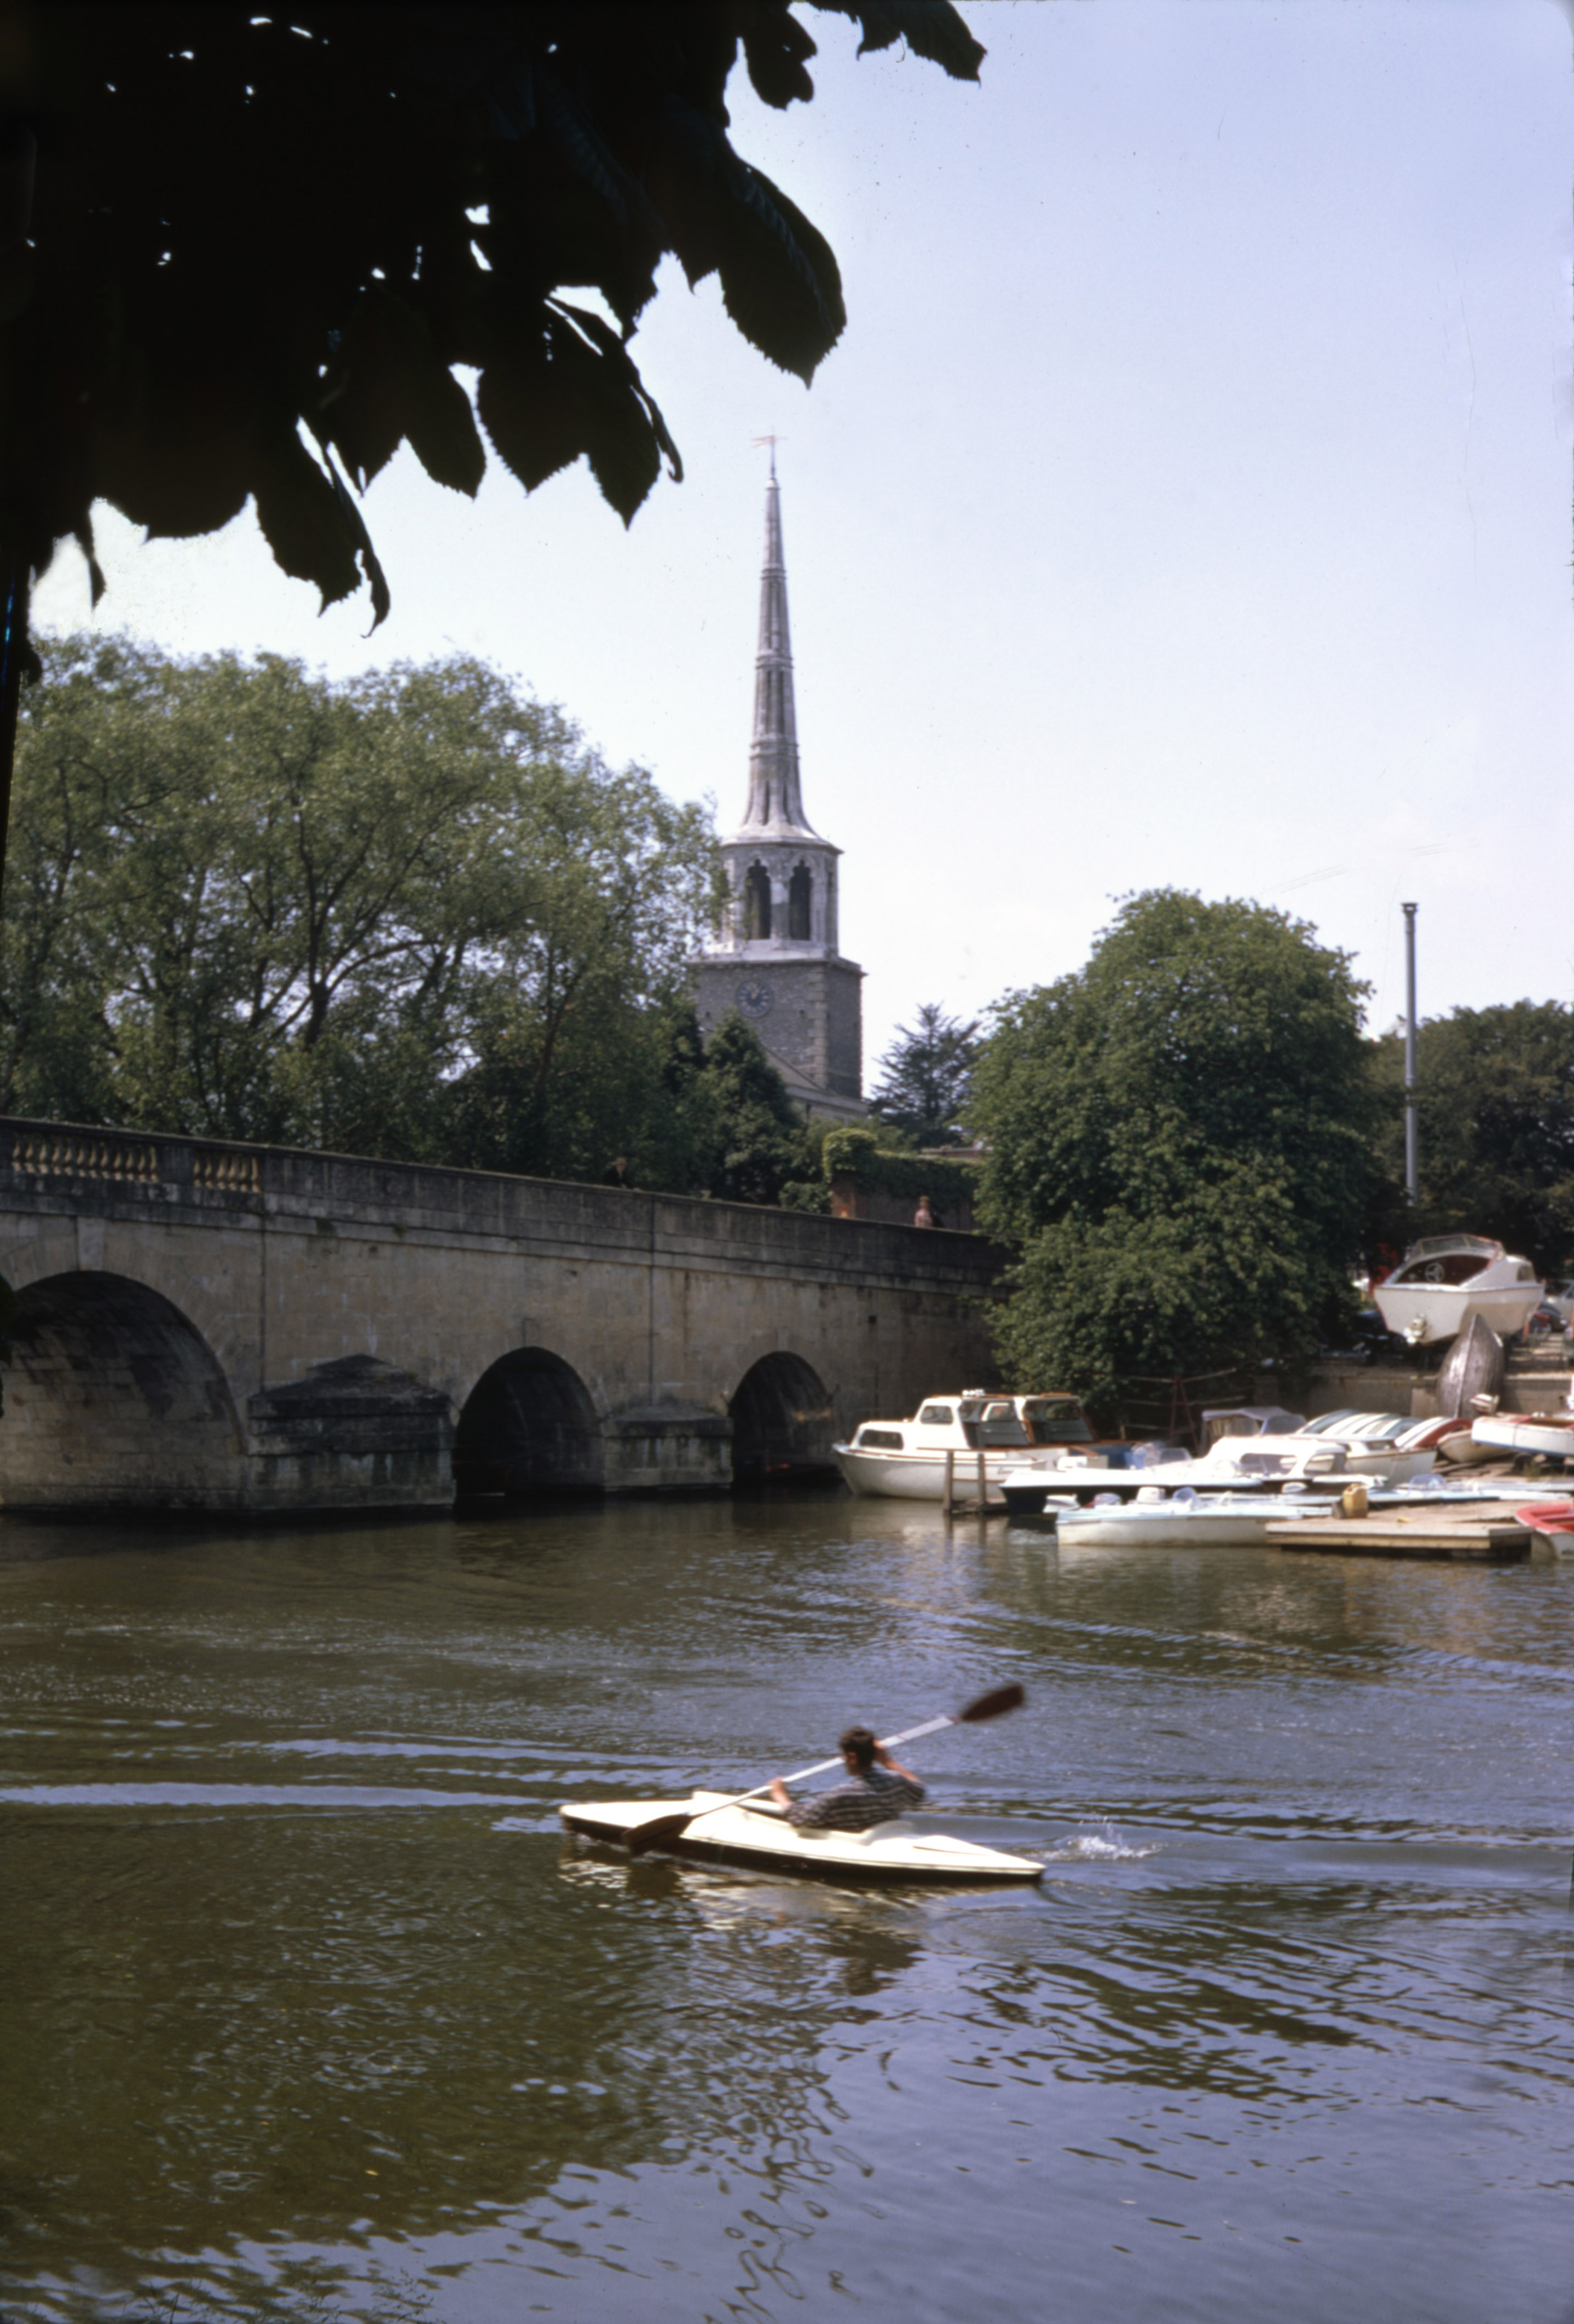 April 1968 Wallingford - on the way home from Ponthir